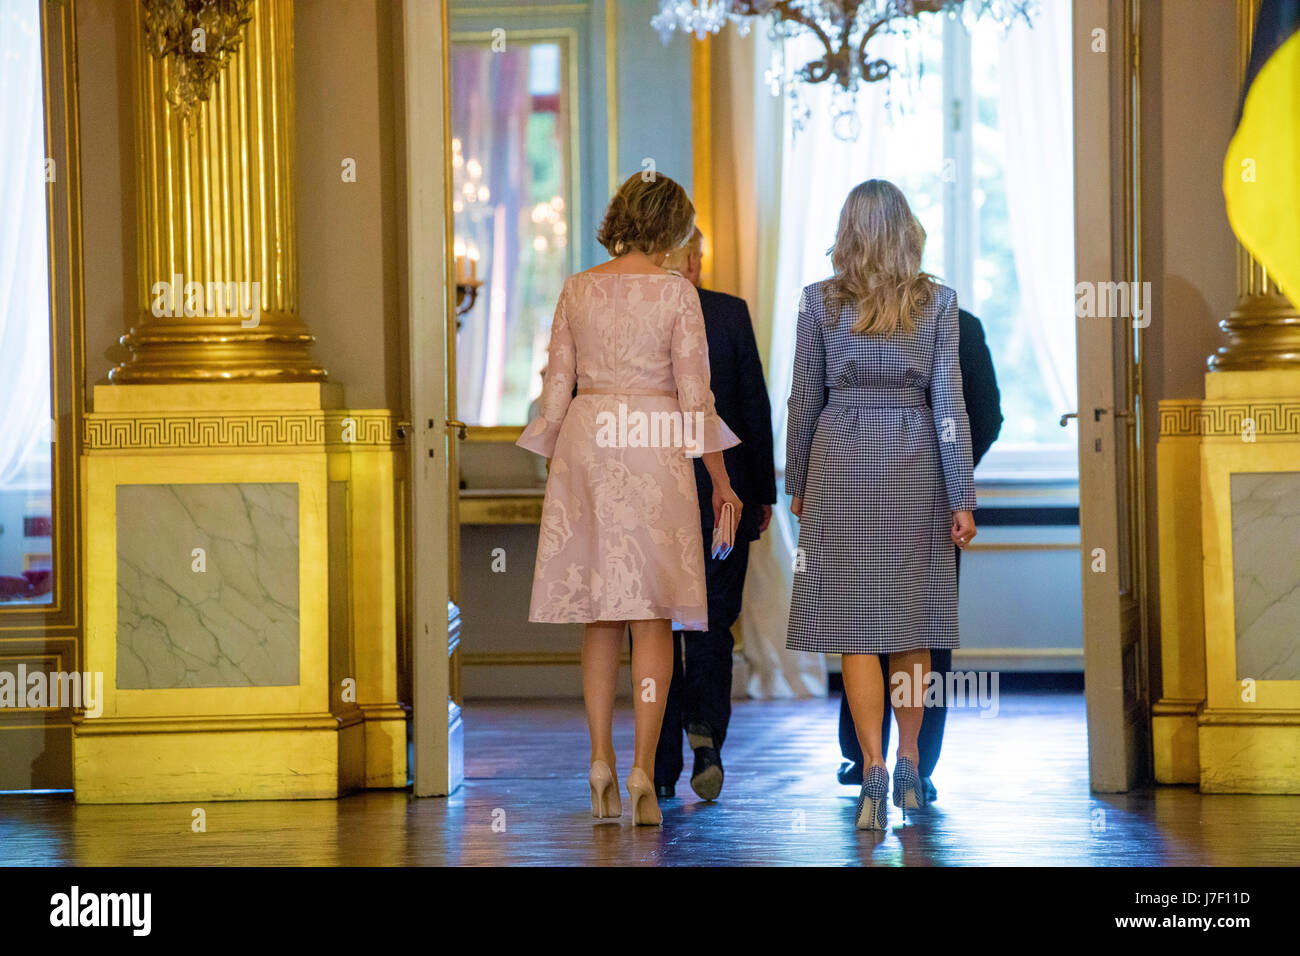 Brussels, Belgium. 24th May, 2017. Queen Mathilde (L) of Belgium welcomes US First Lady Melania Trump at the Royal Palace in Brussels, 24 May 2017. - NO WIRE SERVICE - Photo: Albert Nieboer/RoyalPress/dpa/Alamy Live News/Alamy Live News Stock Photo